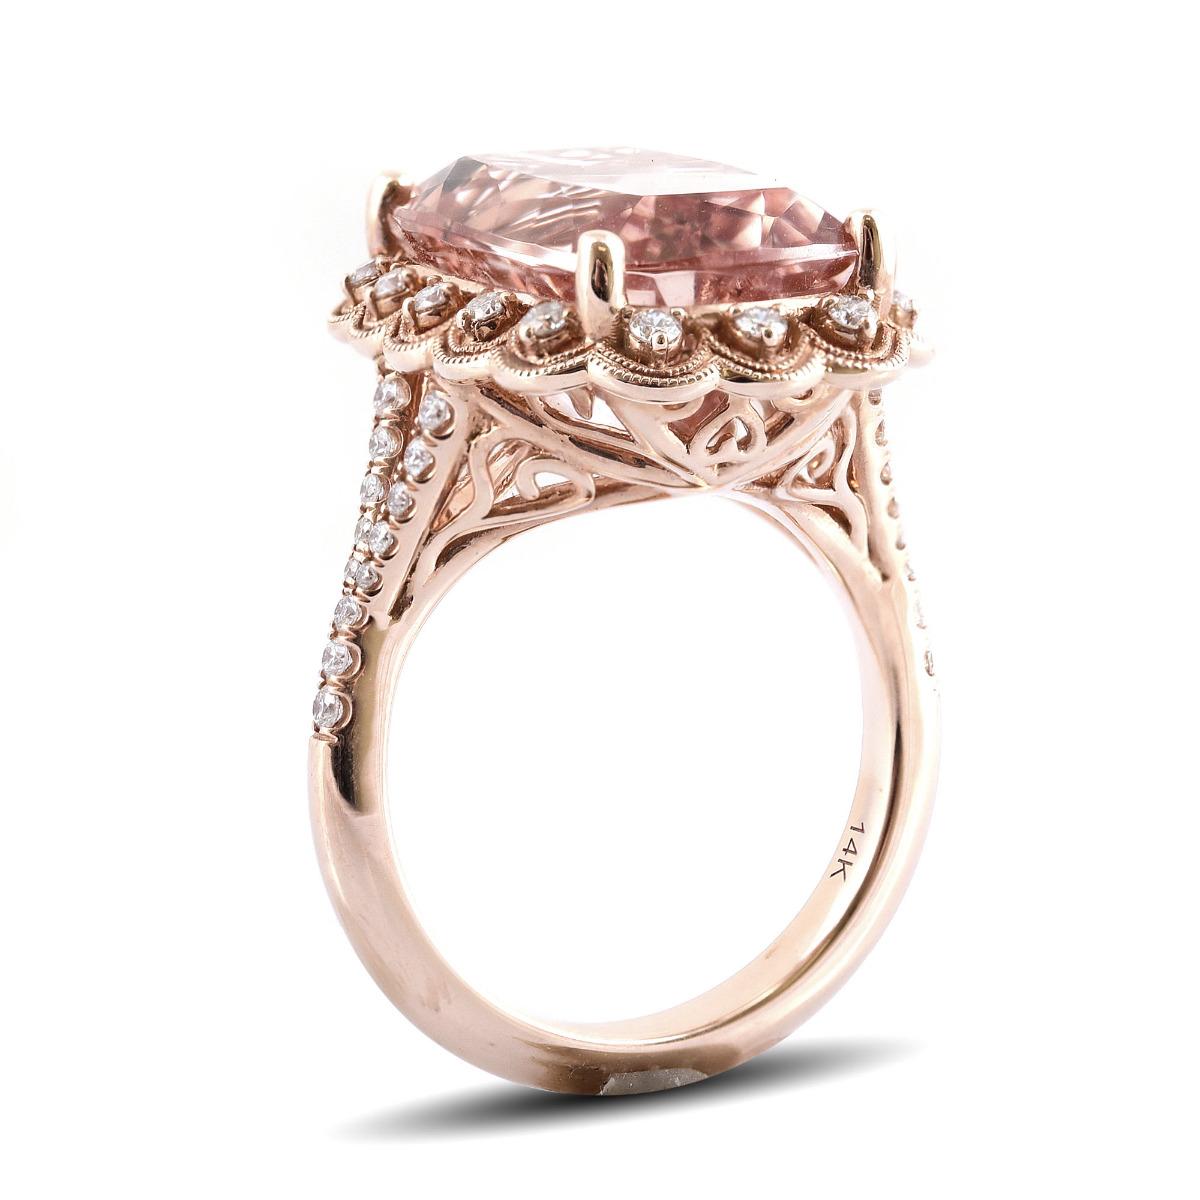 A lovely gemstone set in rose gold, this 11.55 carat mystical Morganite adds a touch of fresh sexiness to this ring. Set in 14K gold, there will be no denying the durability of this ring paired with the everlasting salmon colored beryl. Although